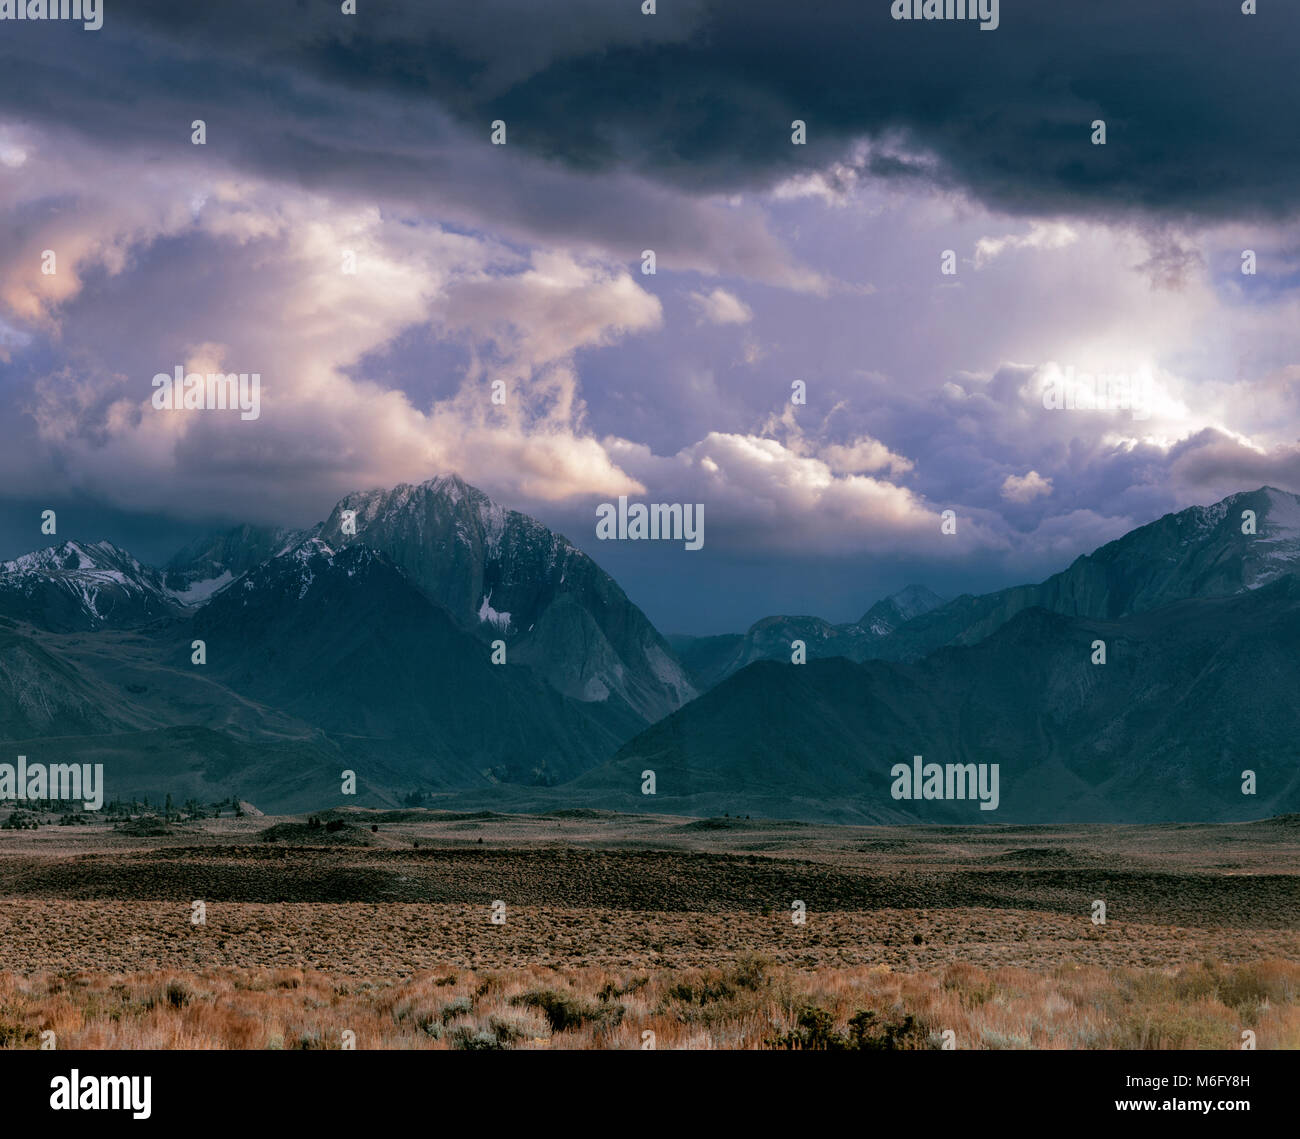 Nuvole di tempesta, McGee Canyon, Mount Morrison, Inyo National Forest, Sierra orientale, California Foto Stock